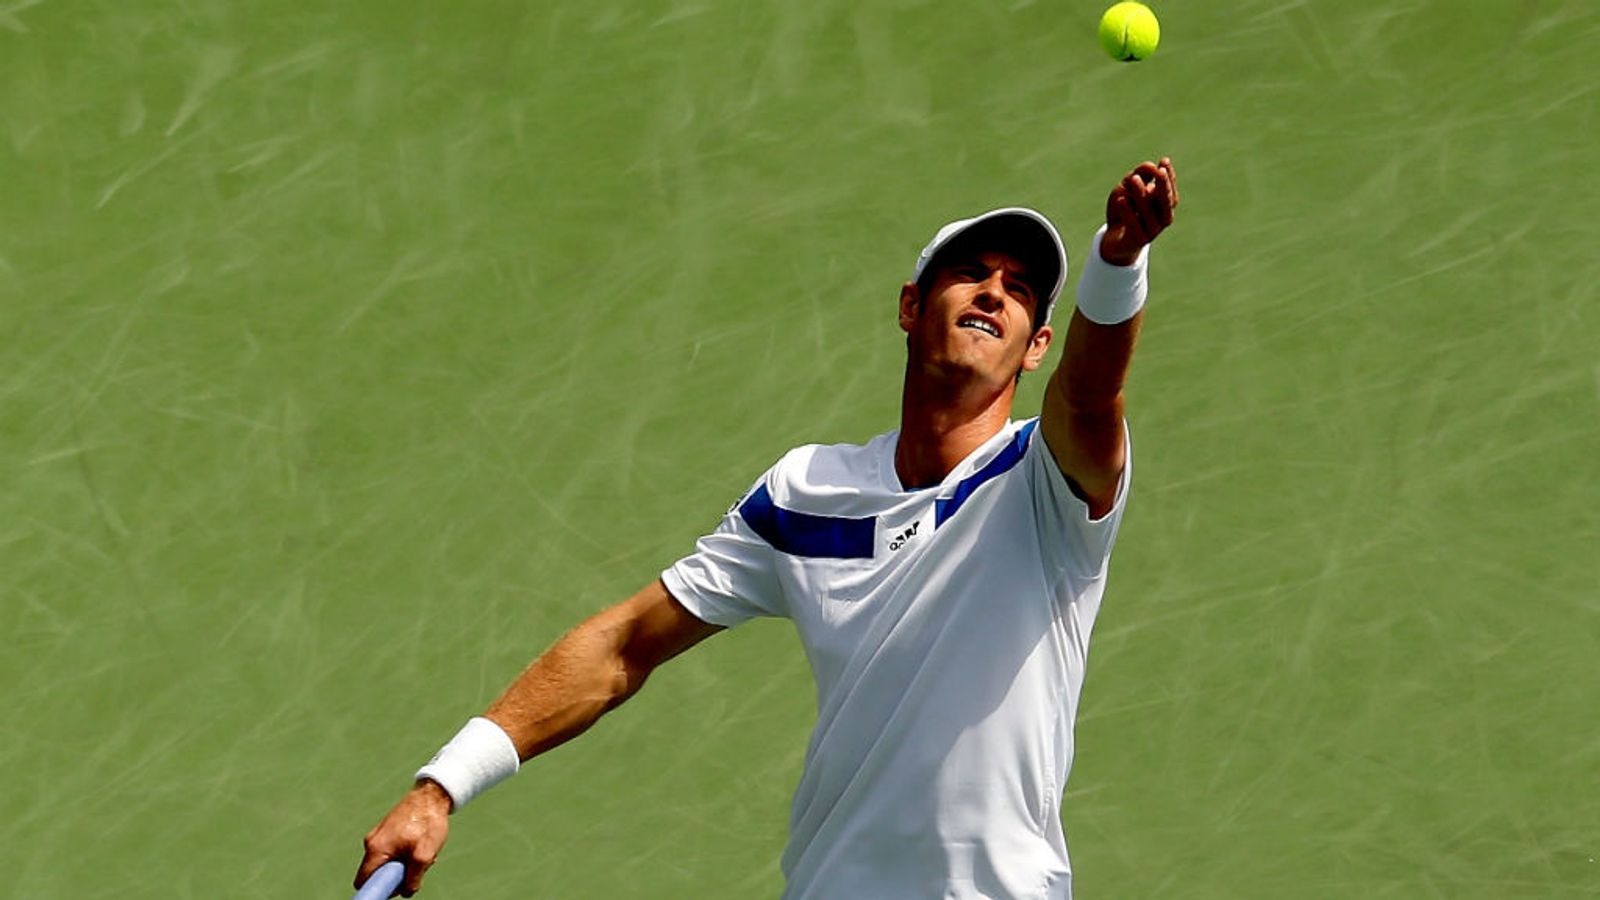 ATP Rogers Cup Andy Murray beats Marcel Granollers in first match back